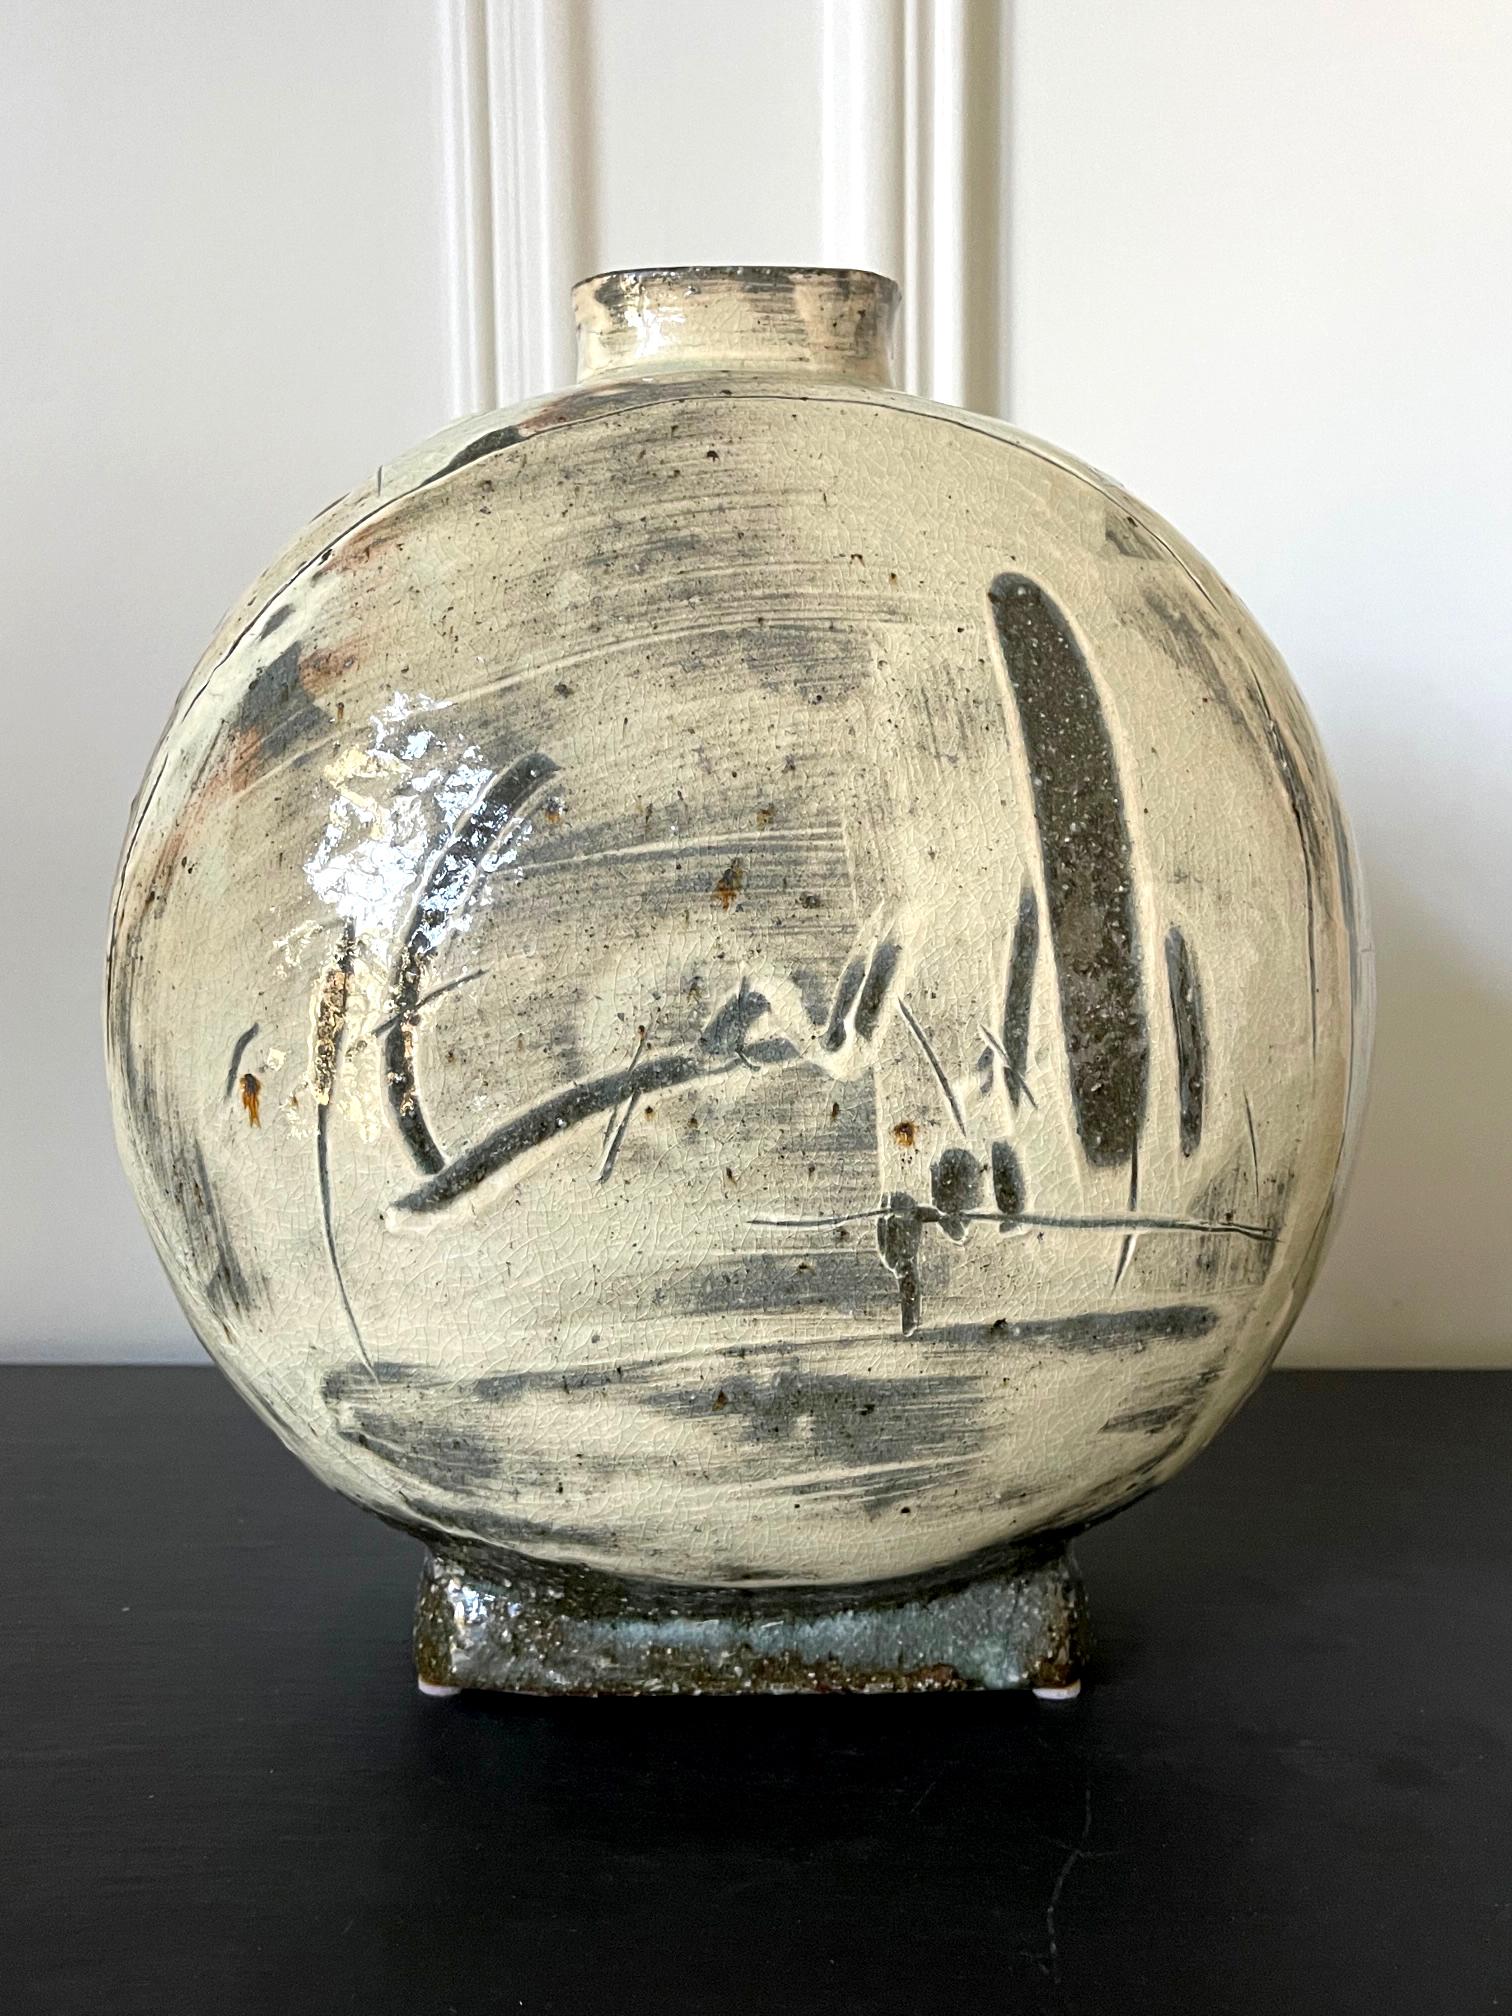 A contemporary ceramic stone ware vessel in the form of a flat moon flask by Korean artist Kang Hyo Lee (South Korean, b. 1961). The work is inspired by traditional Korean Buncheong ware. It is a new interpretation of the white slip glaze with